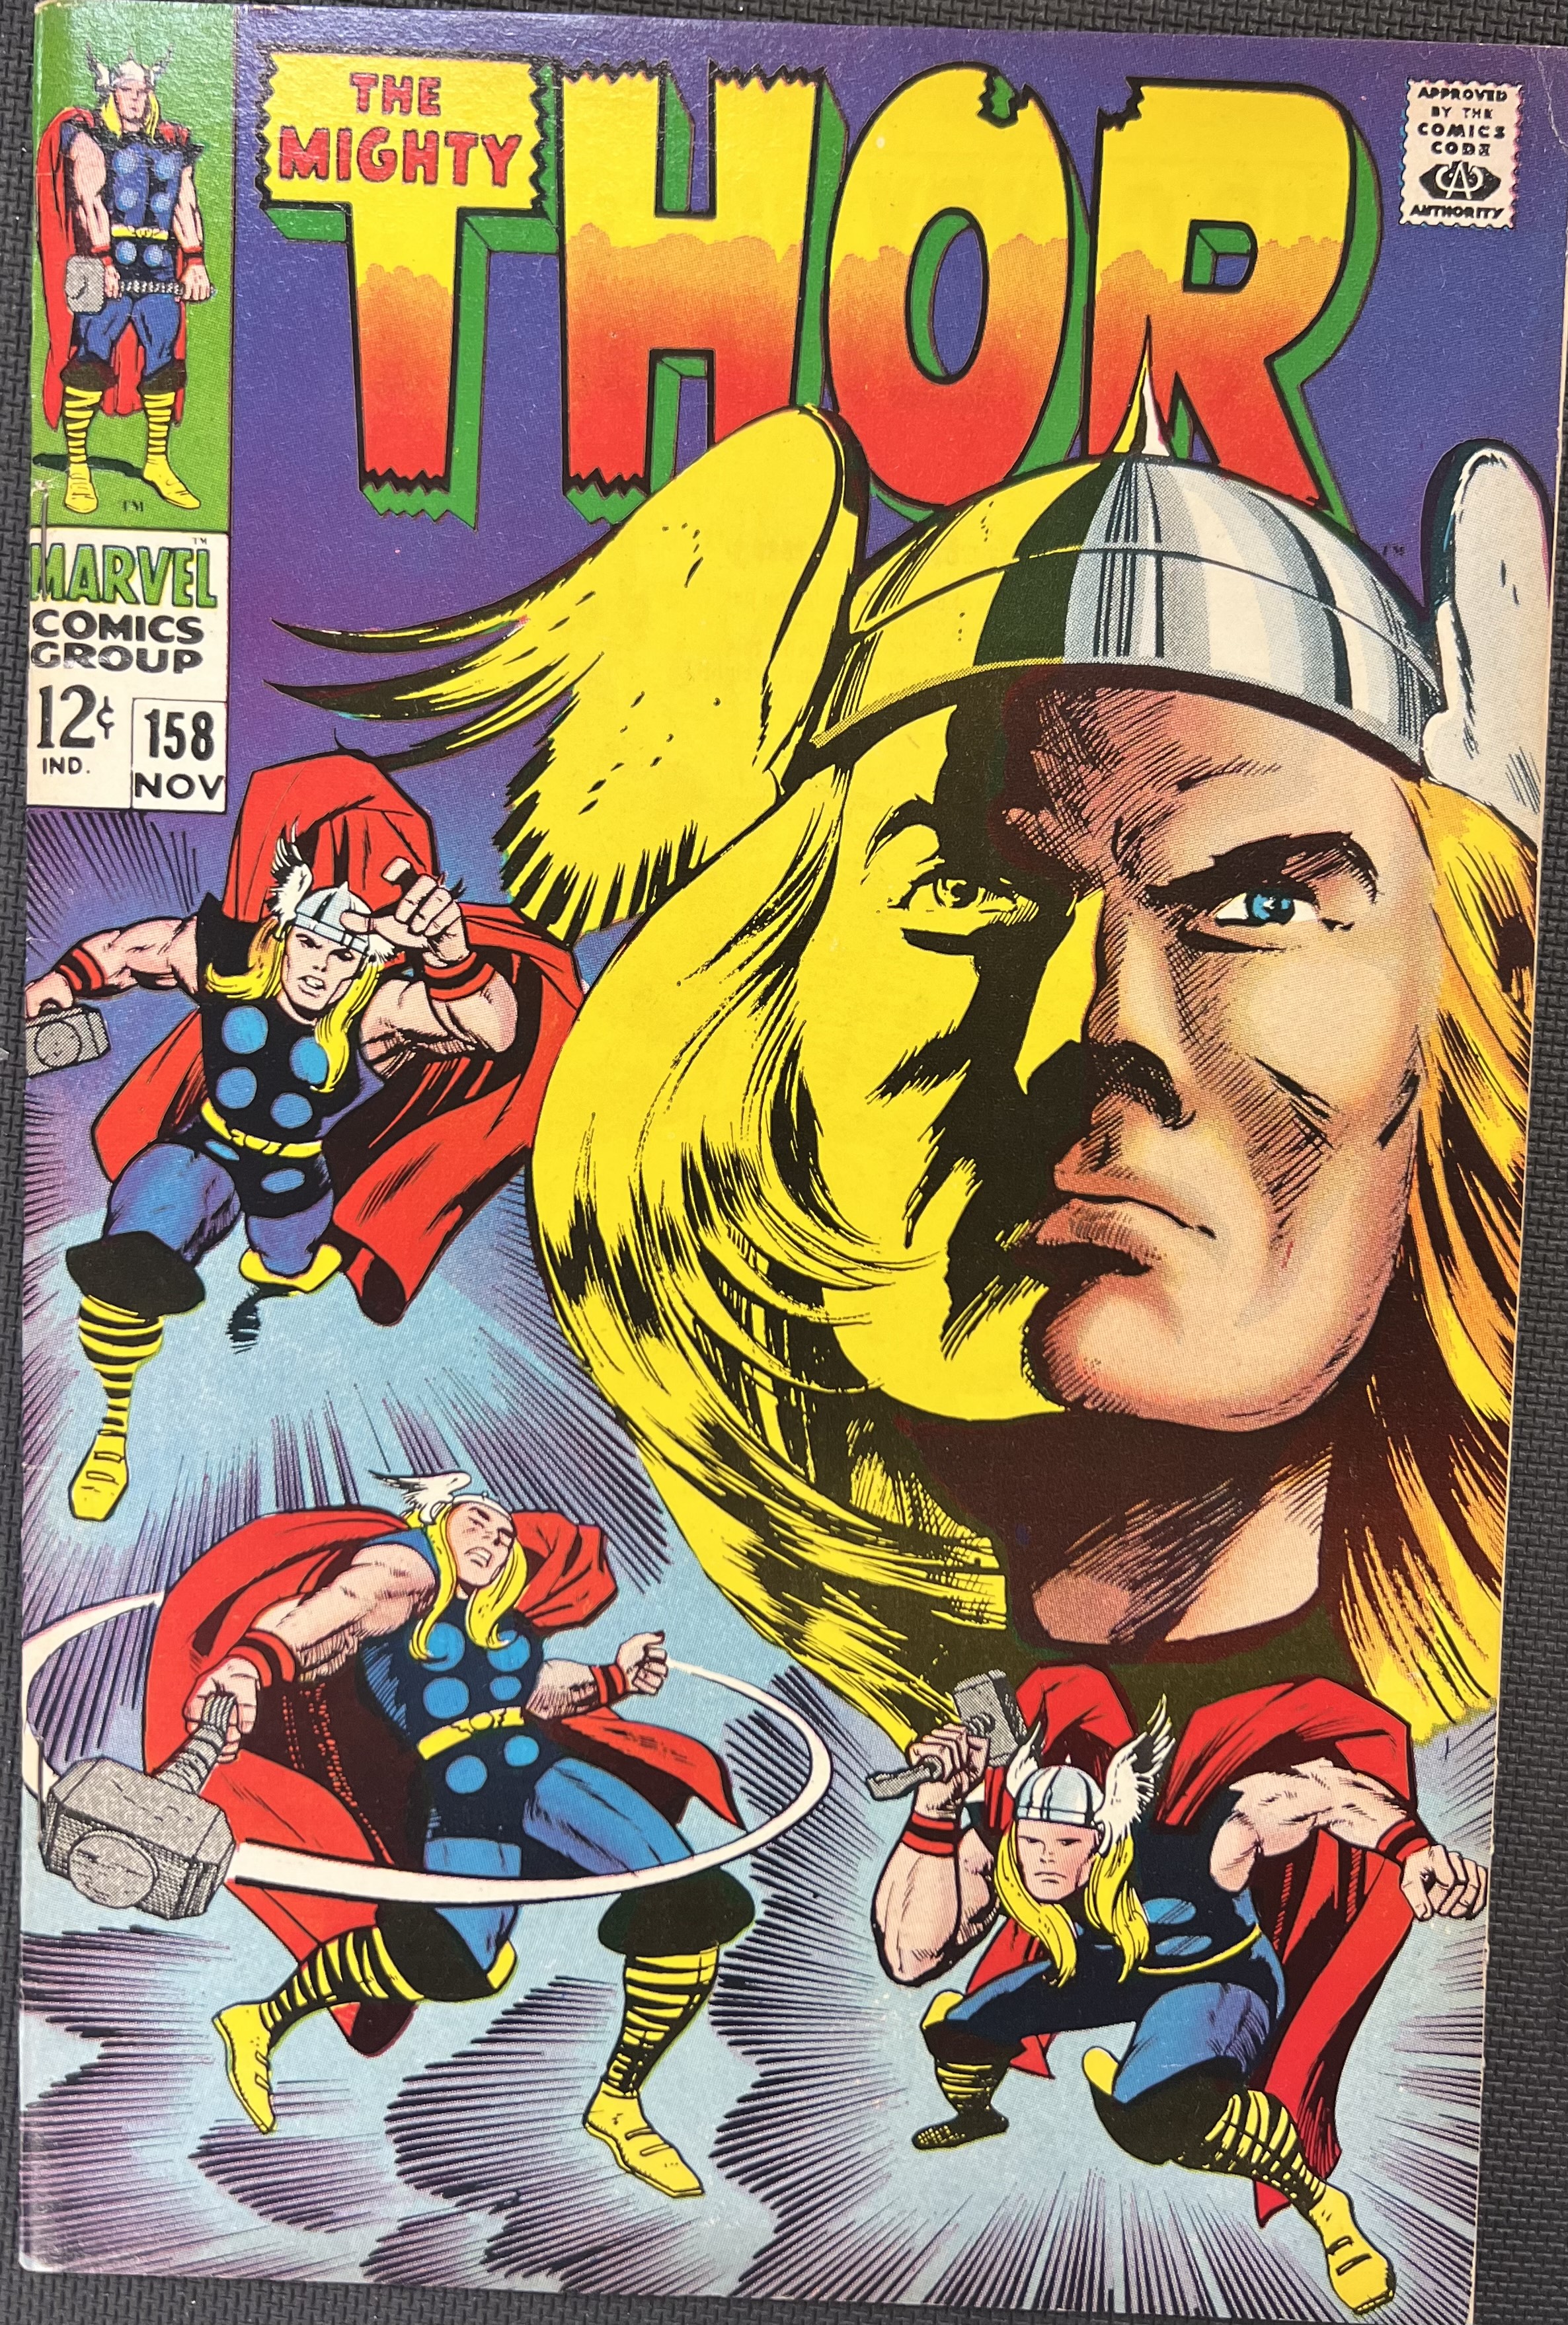 Thor #158 (1962 Marvel 1st Series Journey Into Mystery)